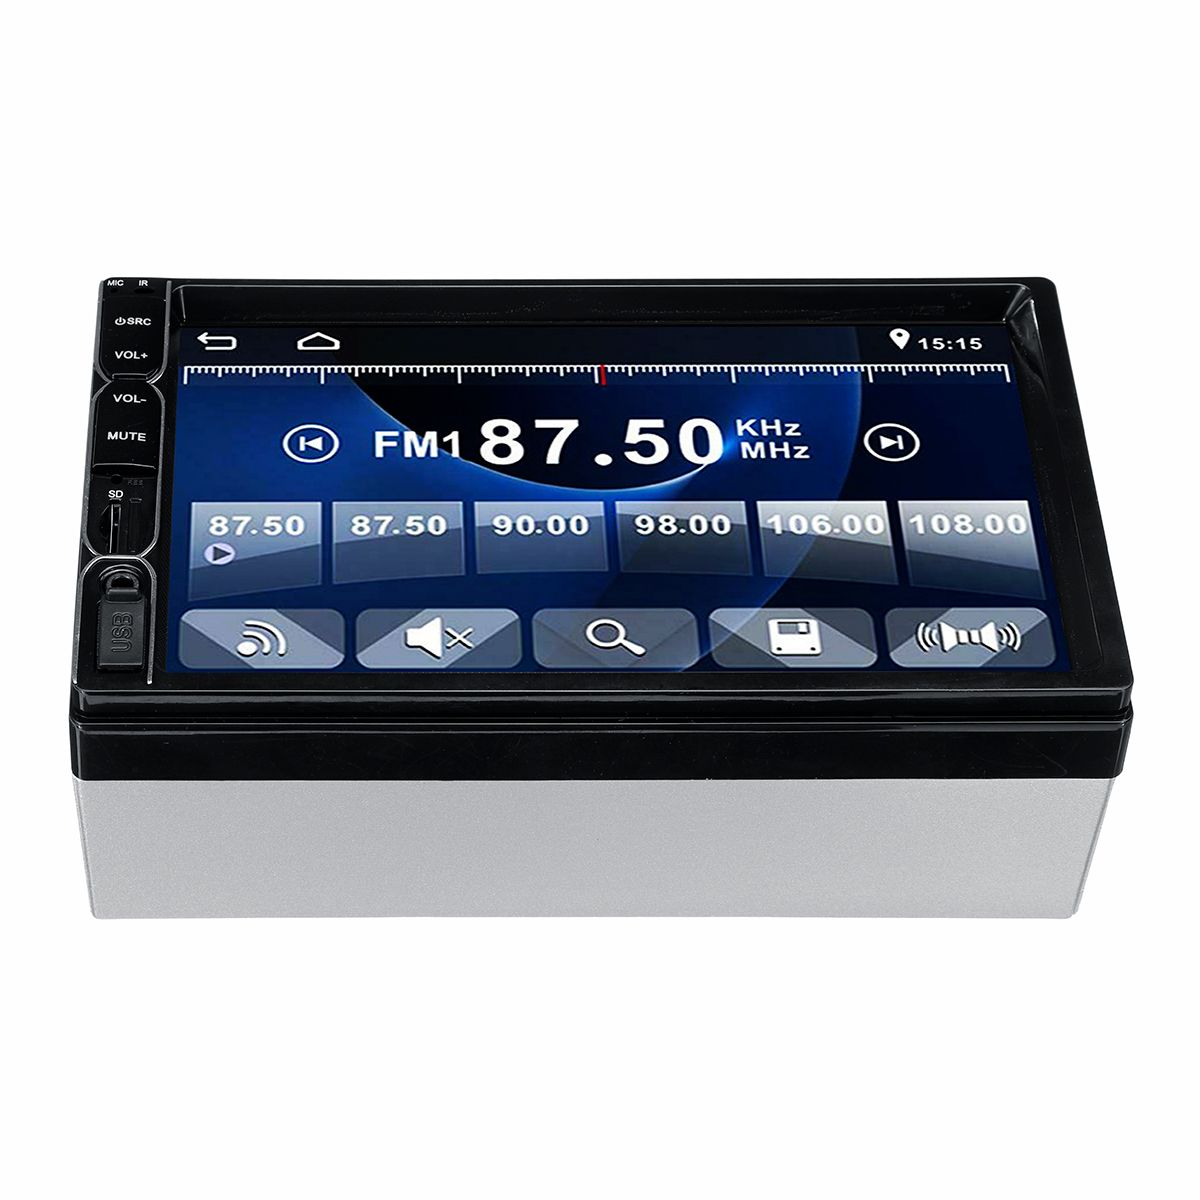 7-Inch-2-Din-Car-Stereo-Auto-Radio-Multimedia-MP5-Player-Rear-View-Camera-HD-bluetooth-Touch-Screen--1558389